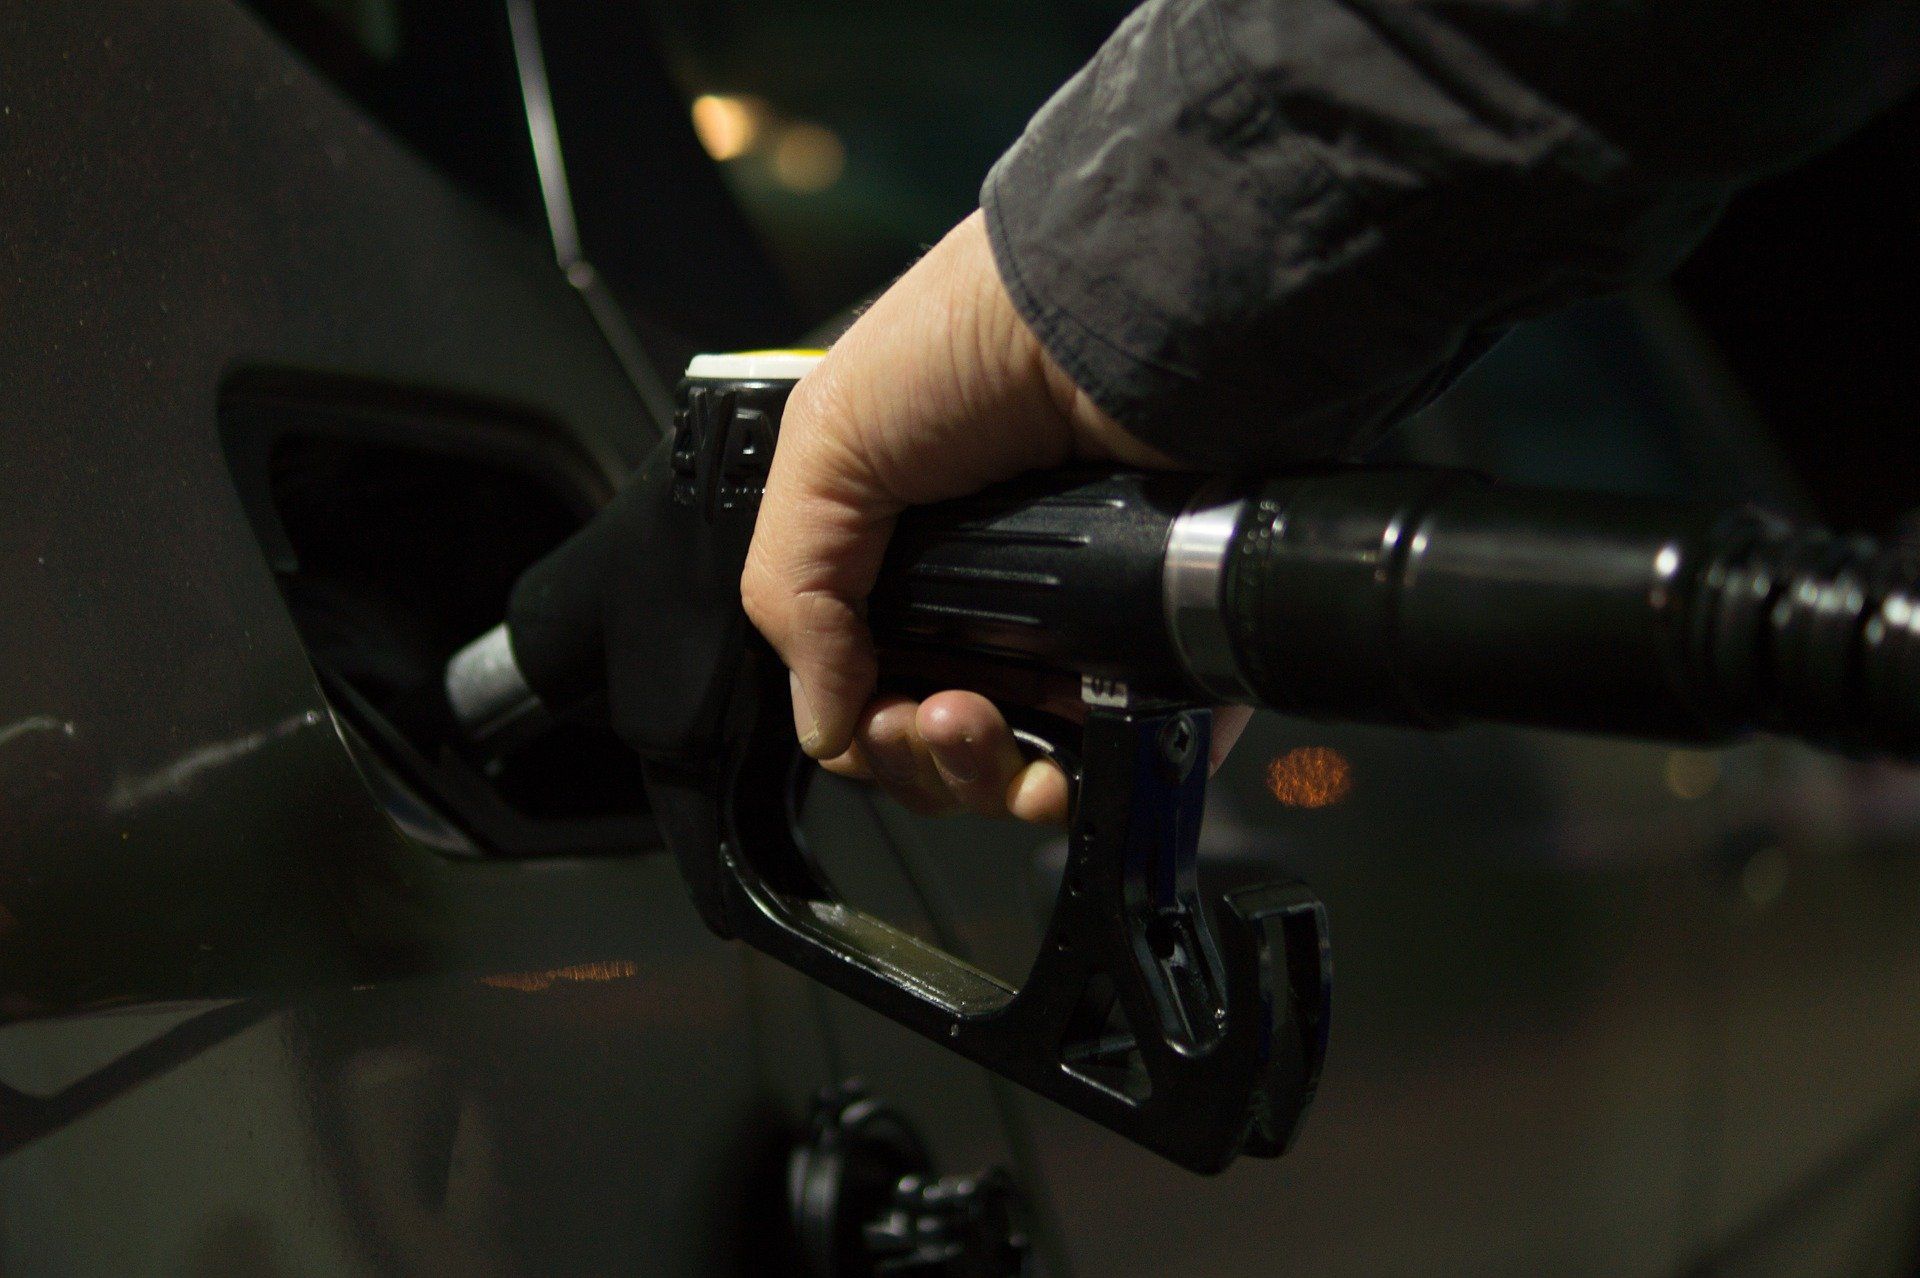 Fuel prices: Petrol priced at Rs 95.41, diesel Rs 86.67 in Delhi on February 9, 2022